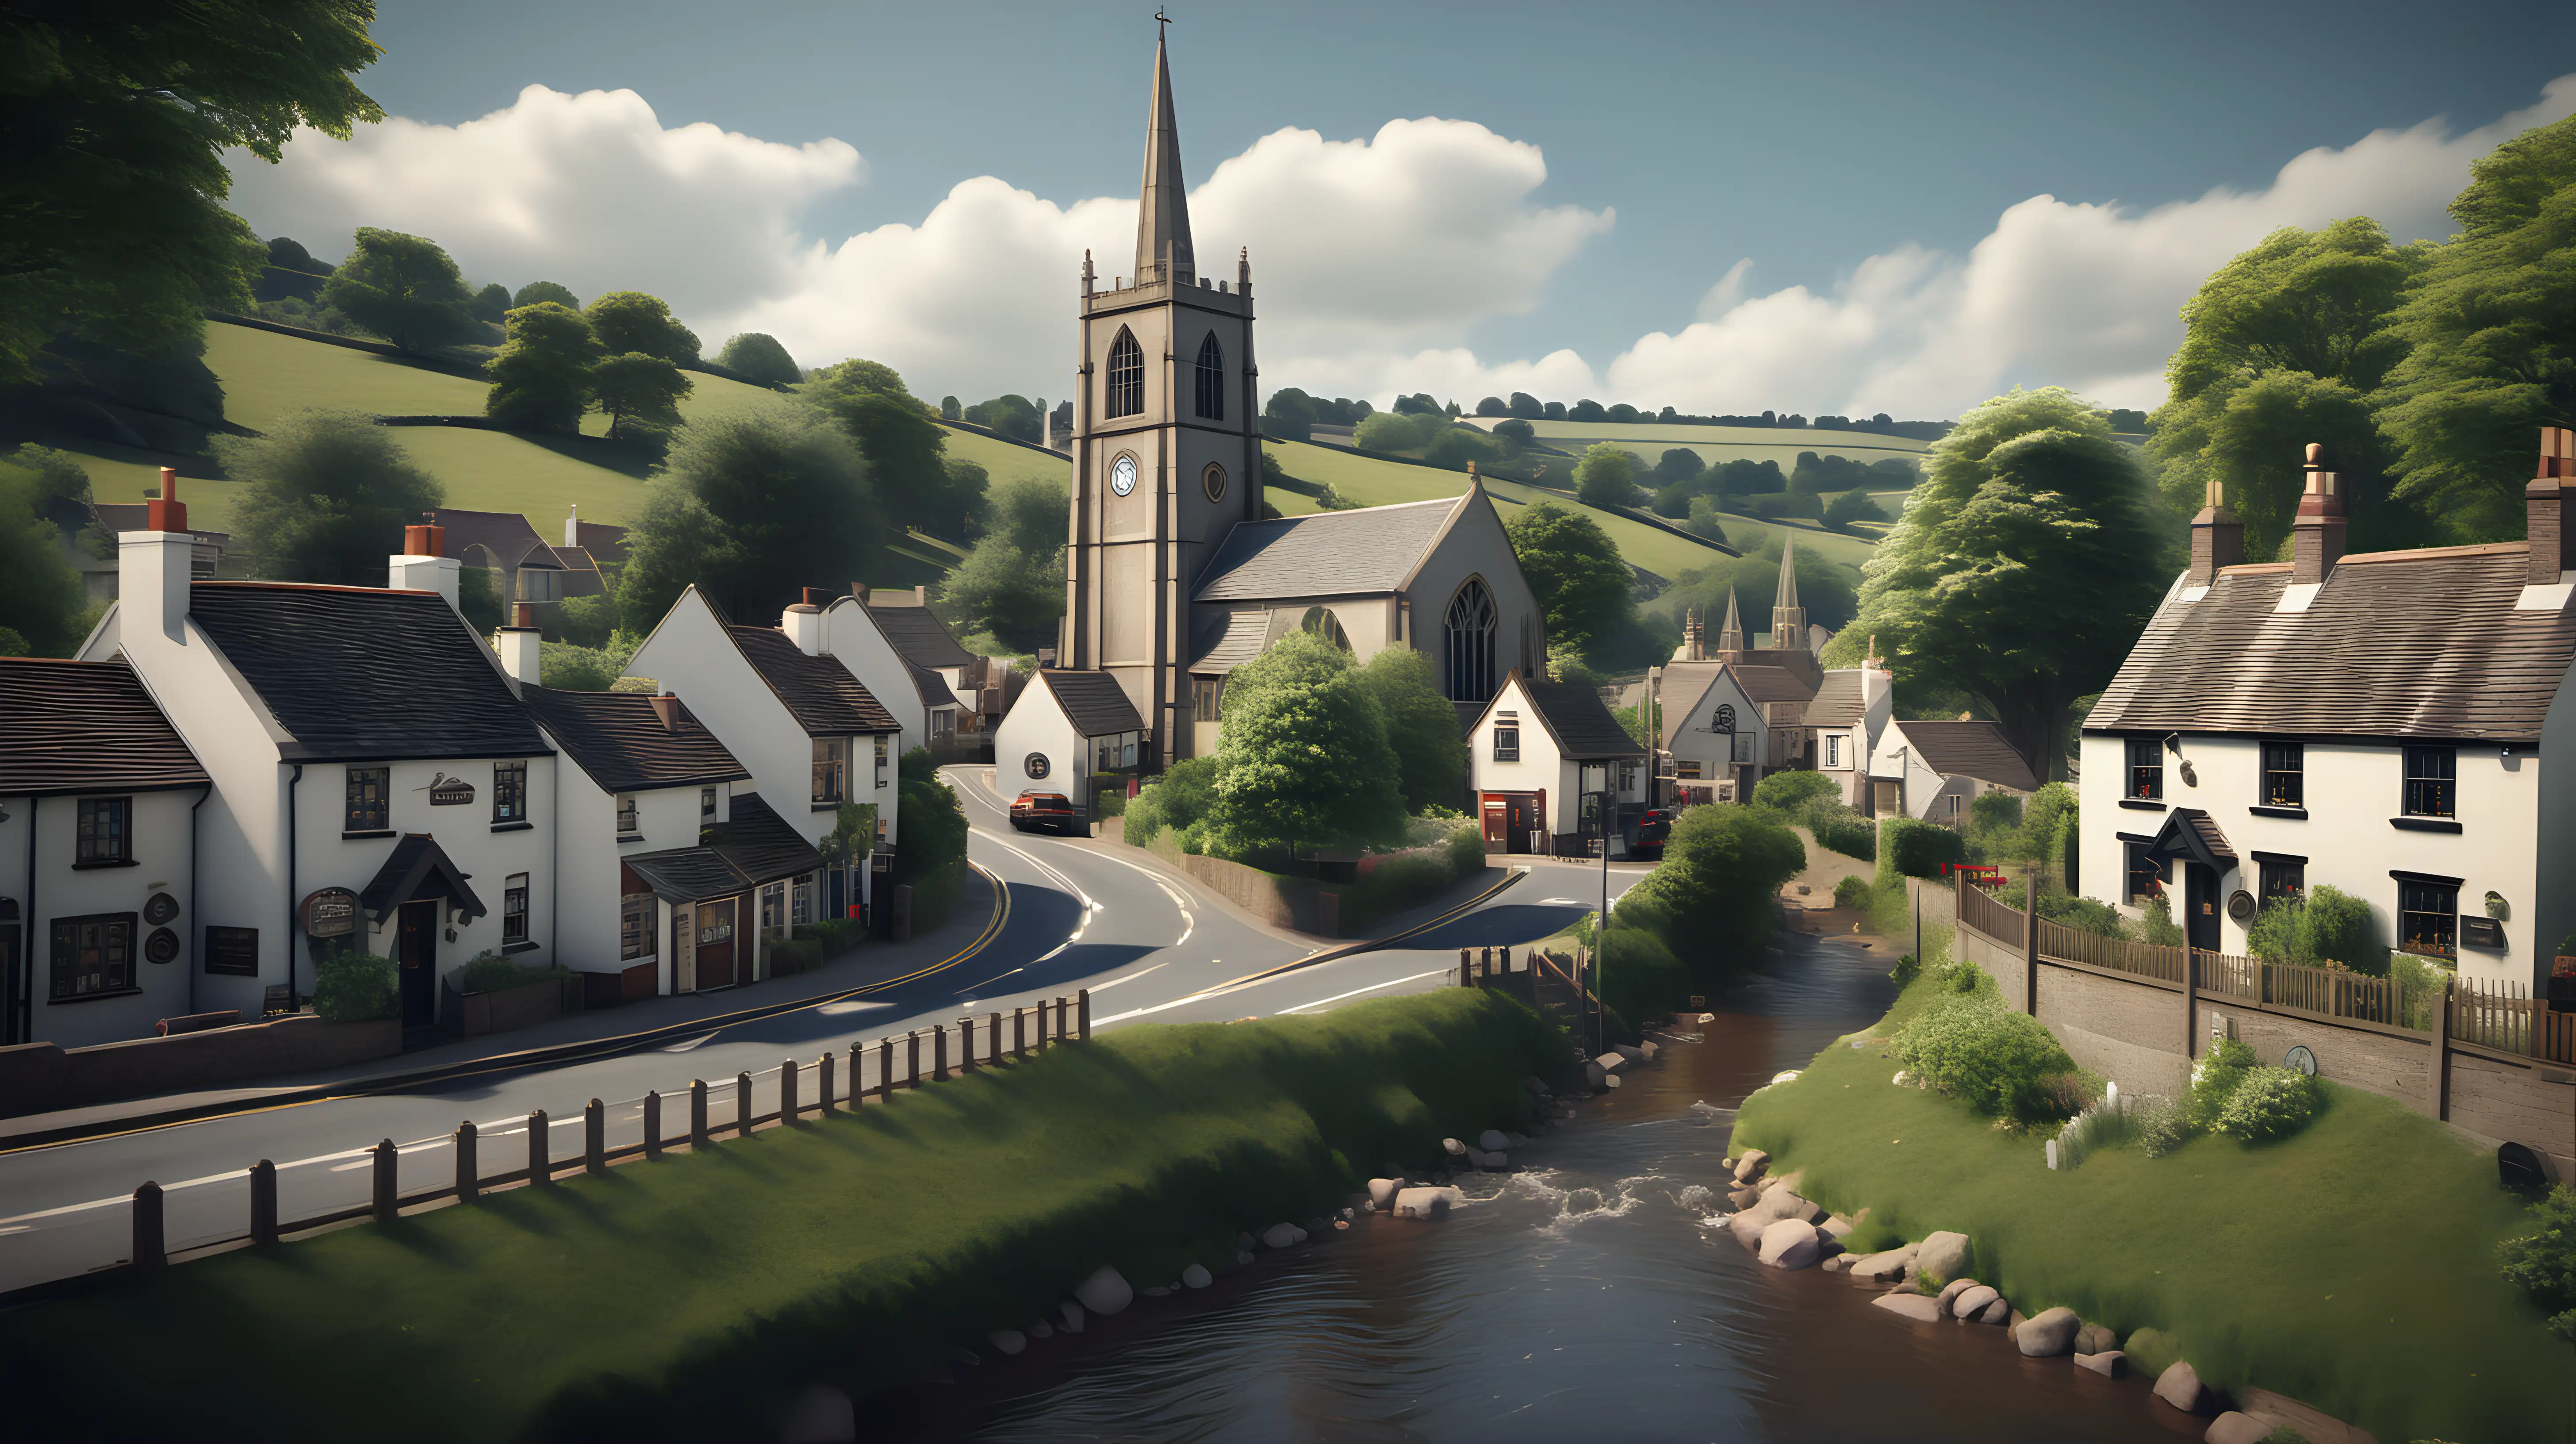 Cute english village, with a church, houses, pub, school, a river running through the centre, hills in the background with trees. Ultra realistic. Street level Shot.